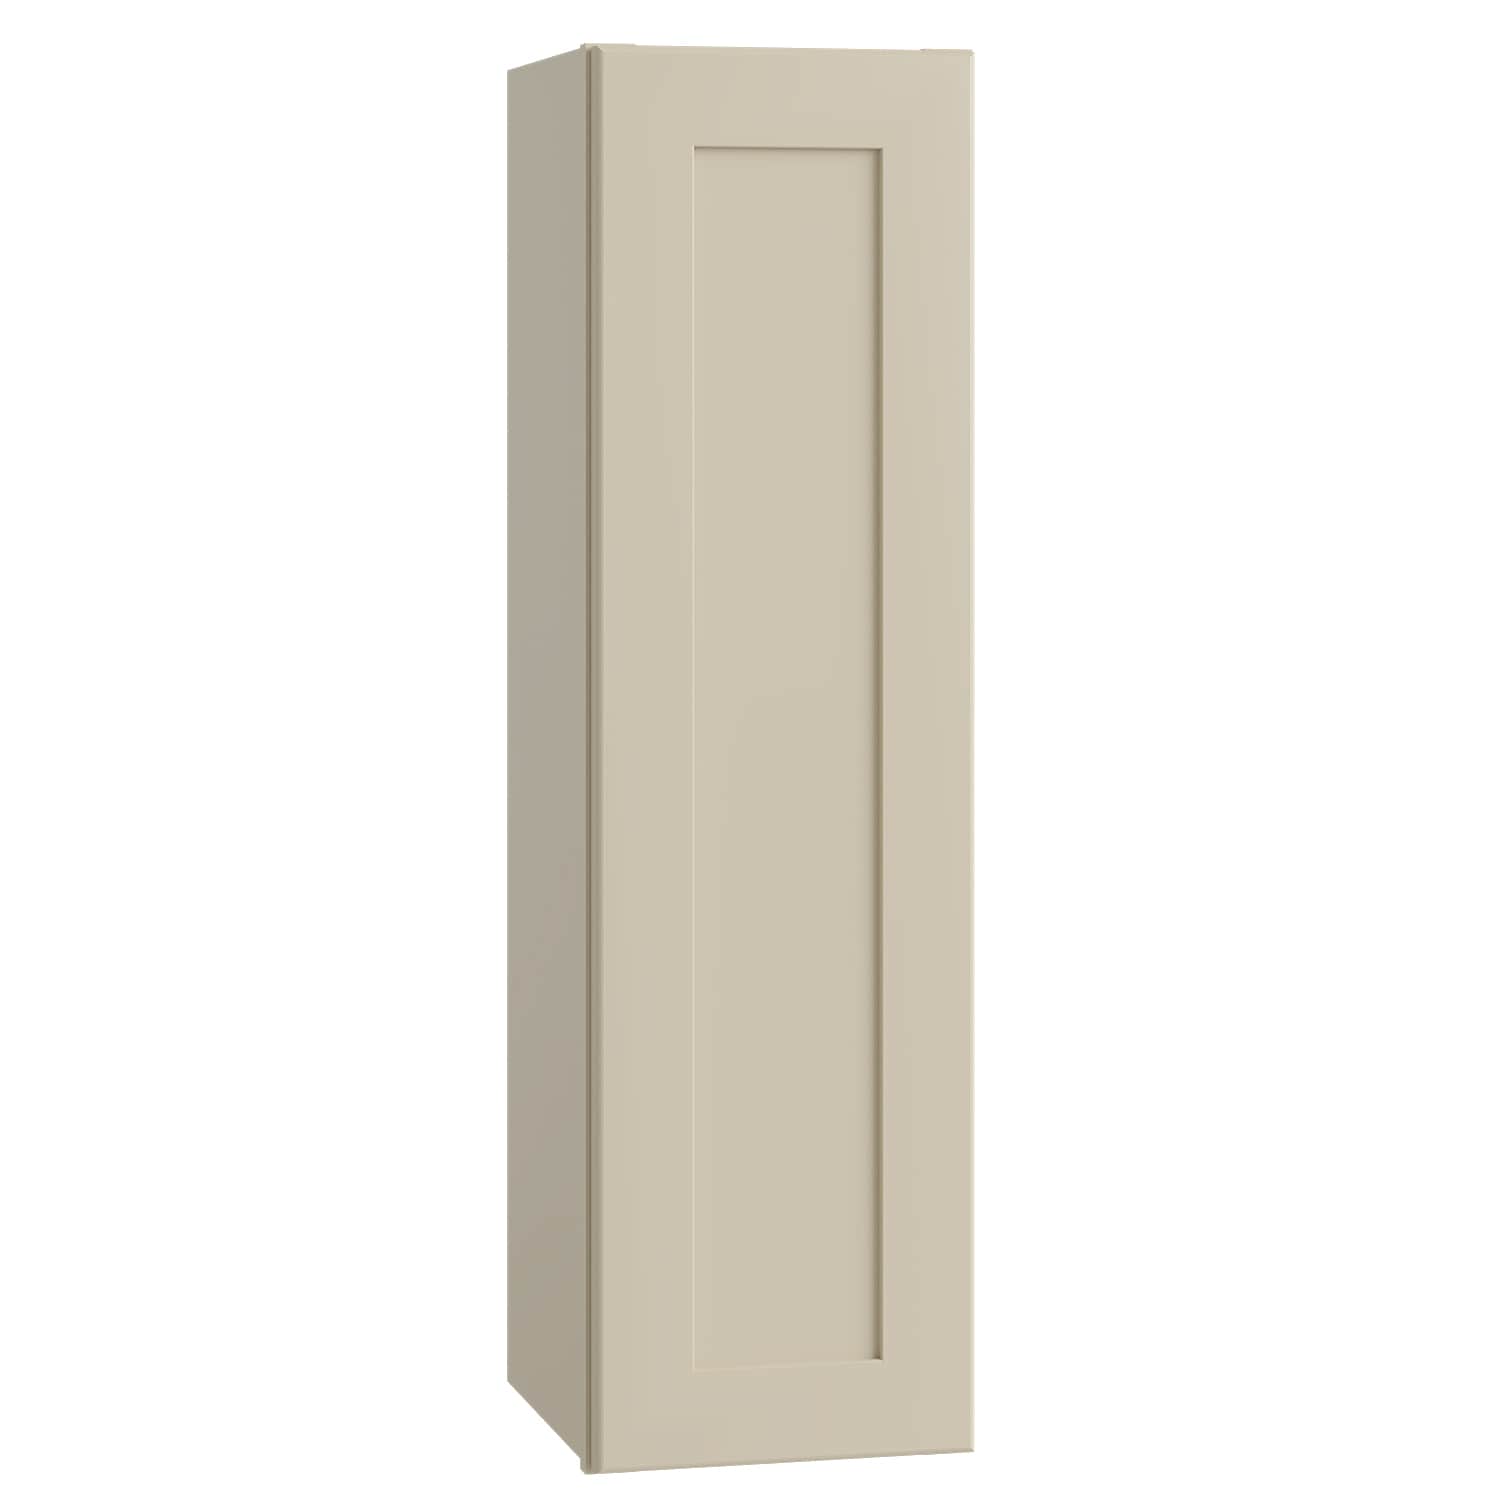 Luxxe Cabinetry 15-in W x 42-in H x 12-in D Norfolk Blended Cream Painted Door Wall Fully Assembled Semi-custom Cabinet in Off-White | W1542L-NBC